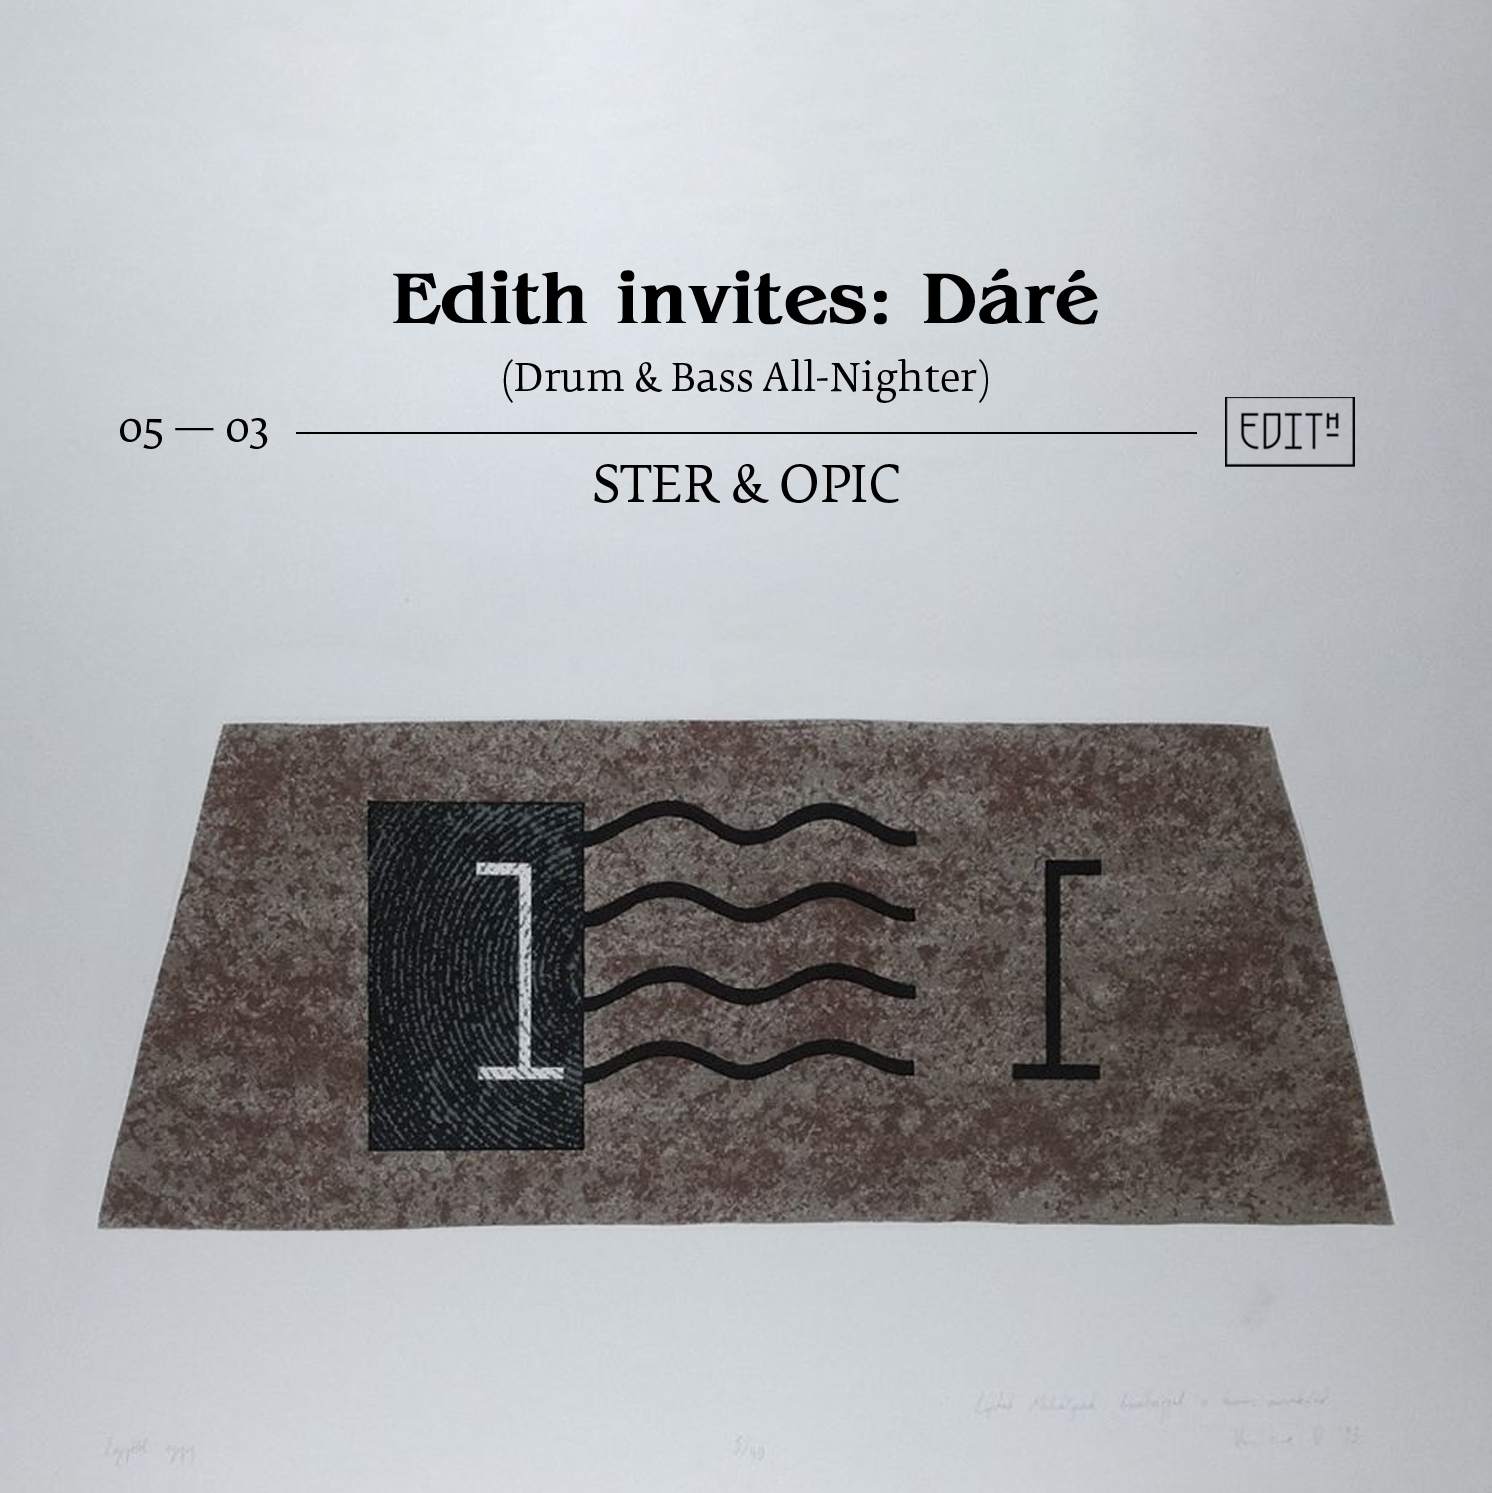 Edith invites: DÁRÉ - Drum & Bass All-Nighter - Ster & Opic - フライヤー表